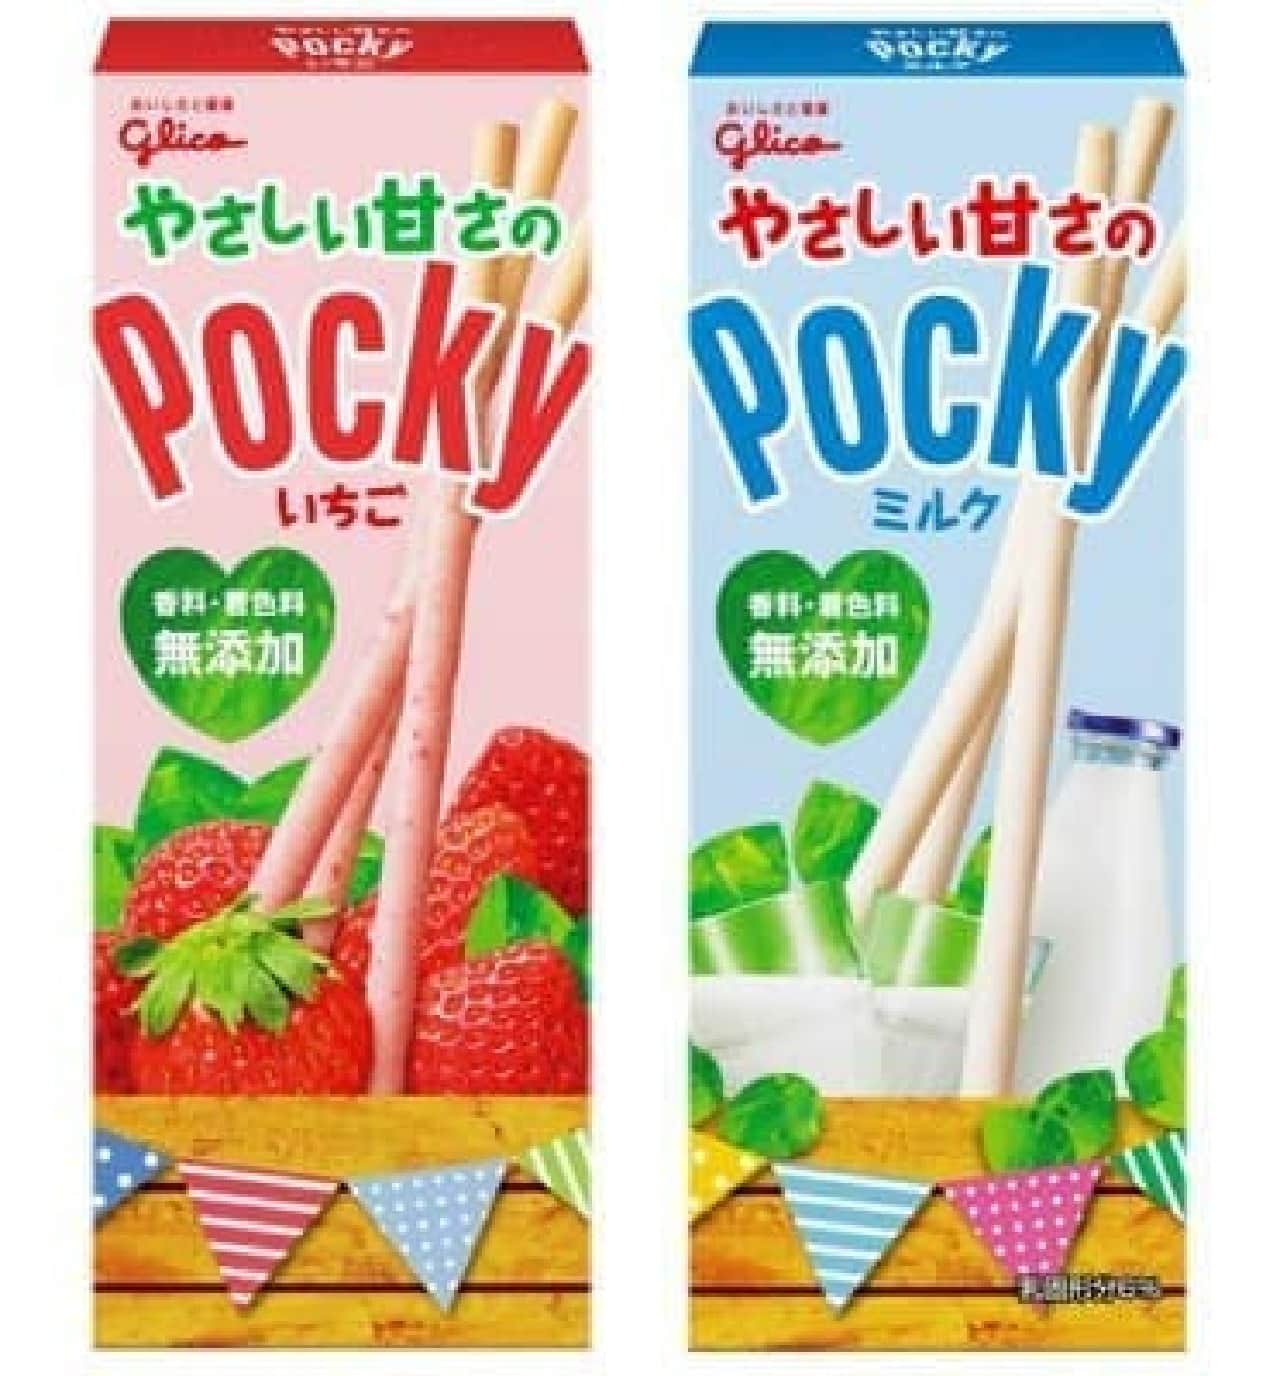 Two types of "gentle sweet Pocky" are now available